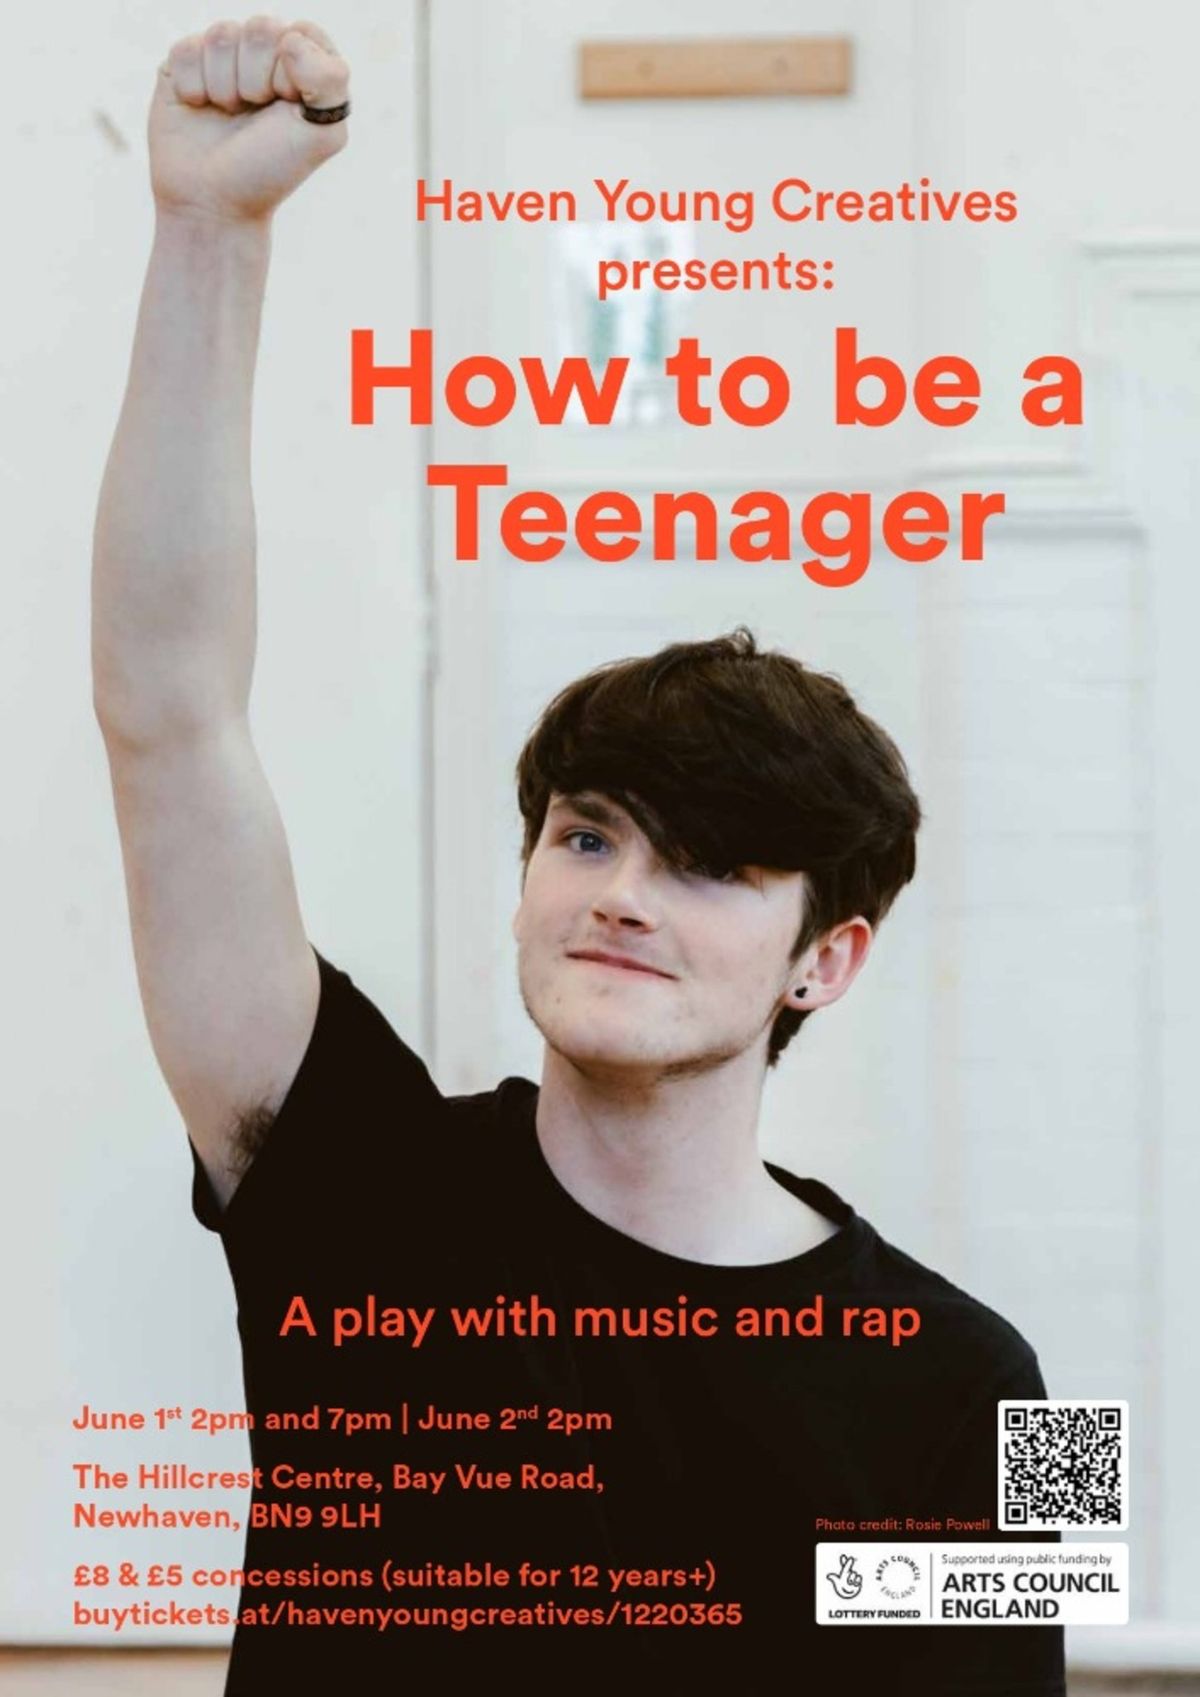 How to be a Teenager